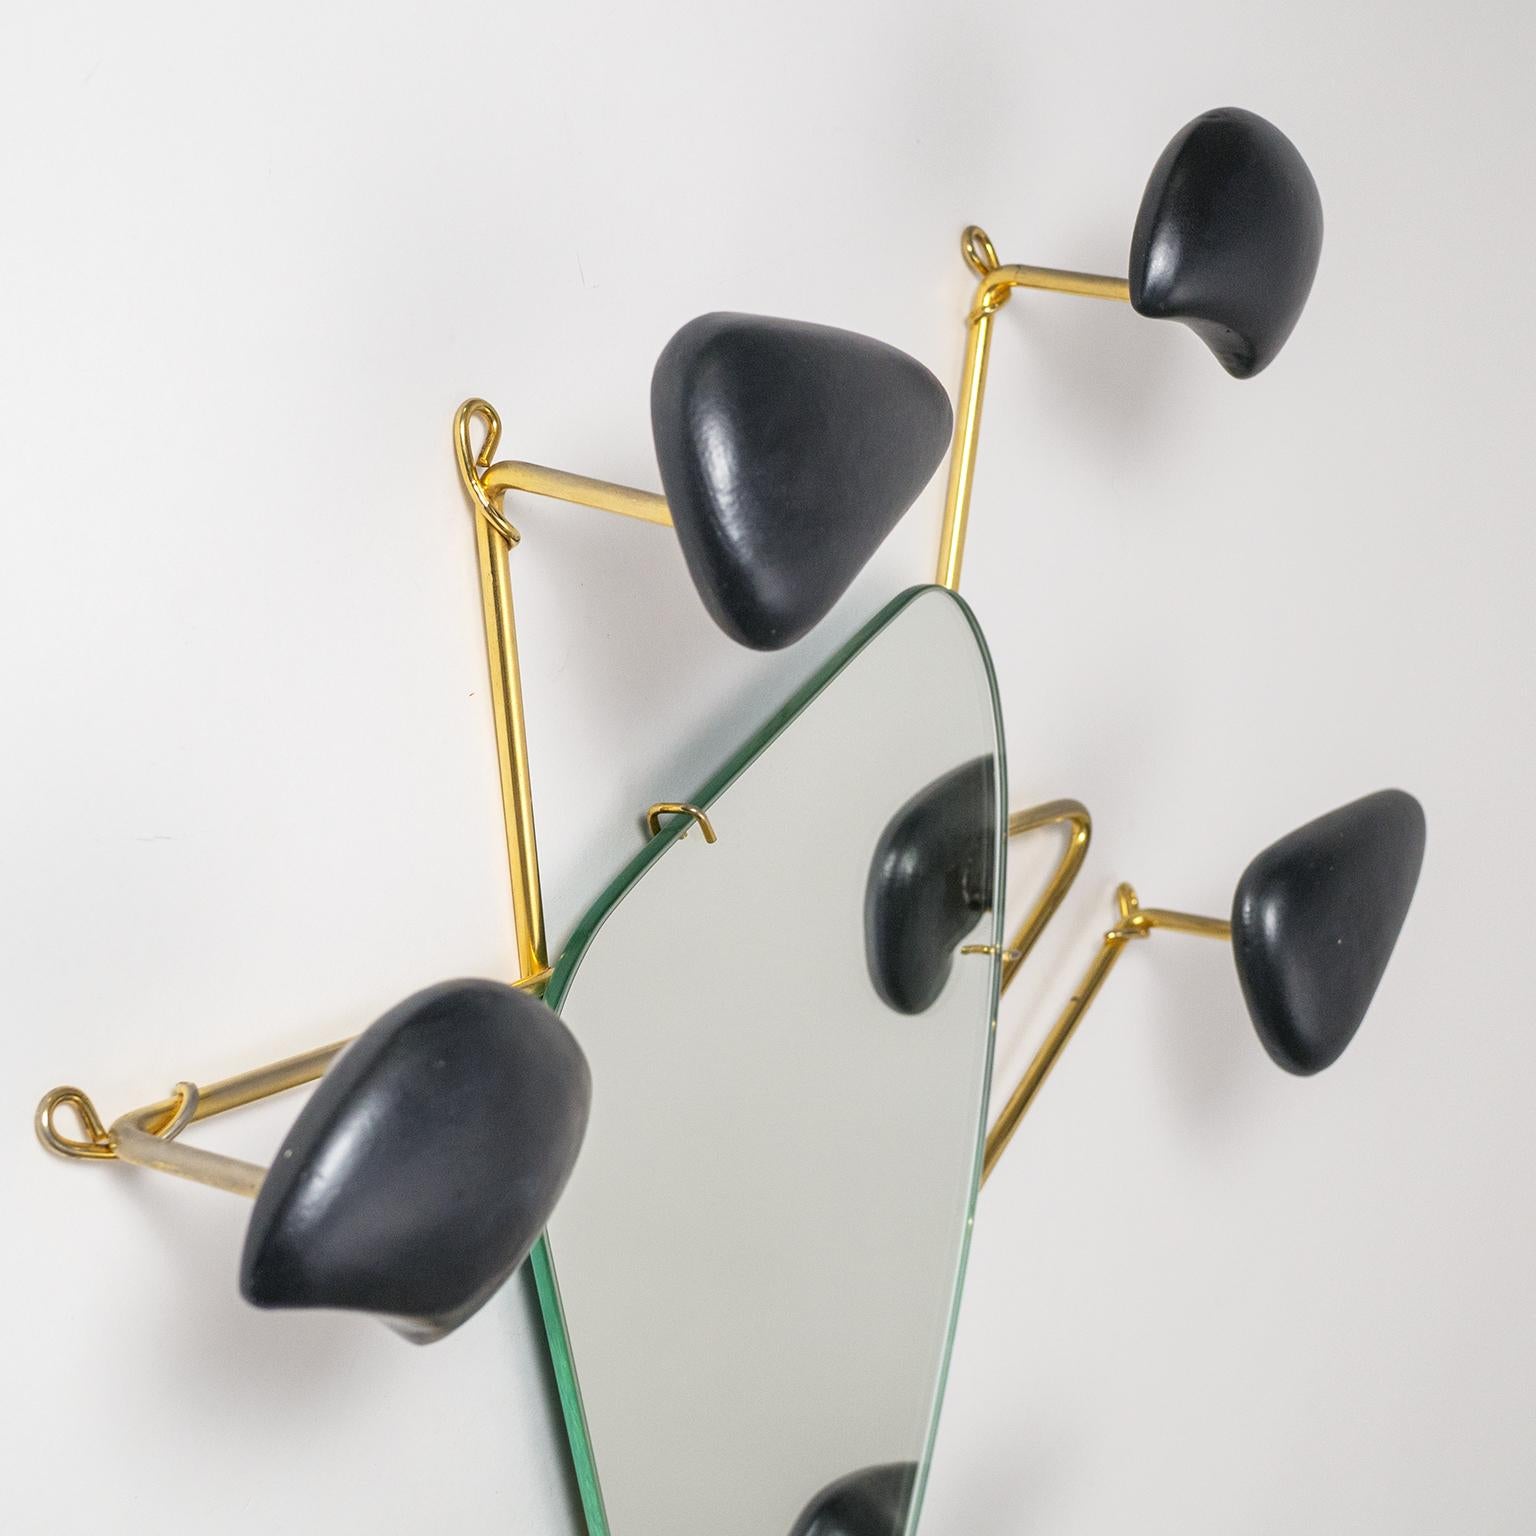 Mid-Century Modern Georges Jouvé Wall-Mounted Coat Rack with Mirror, 1950s